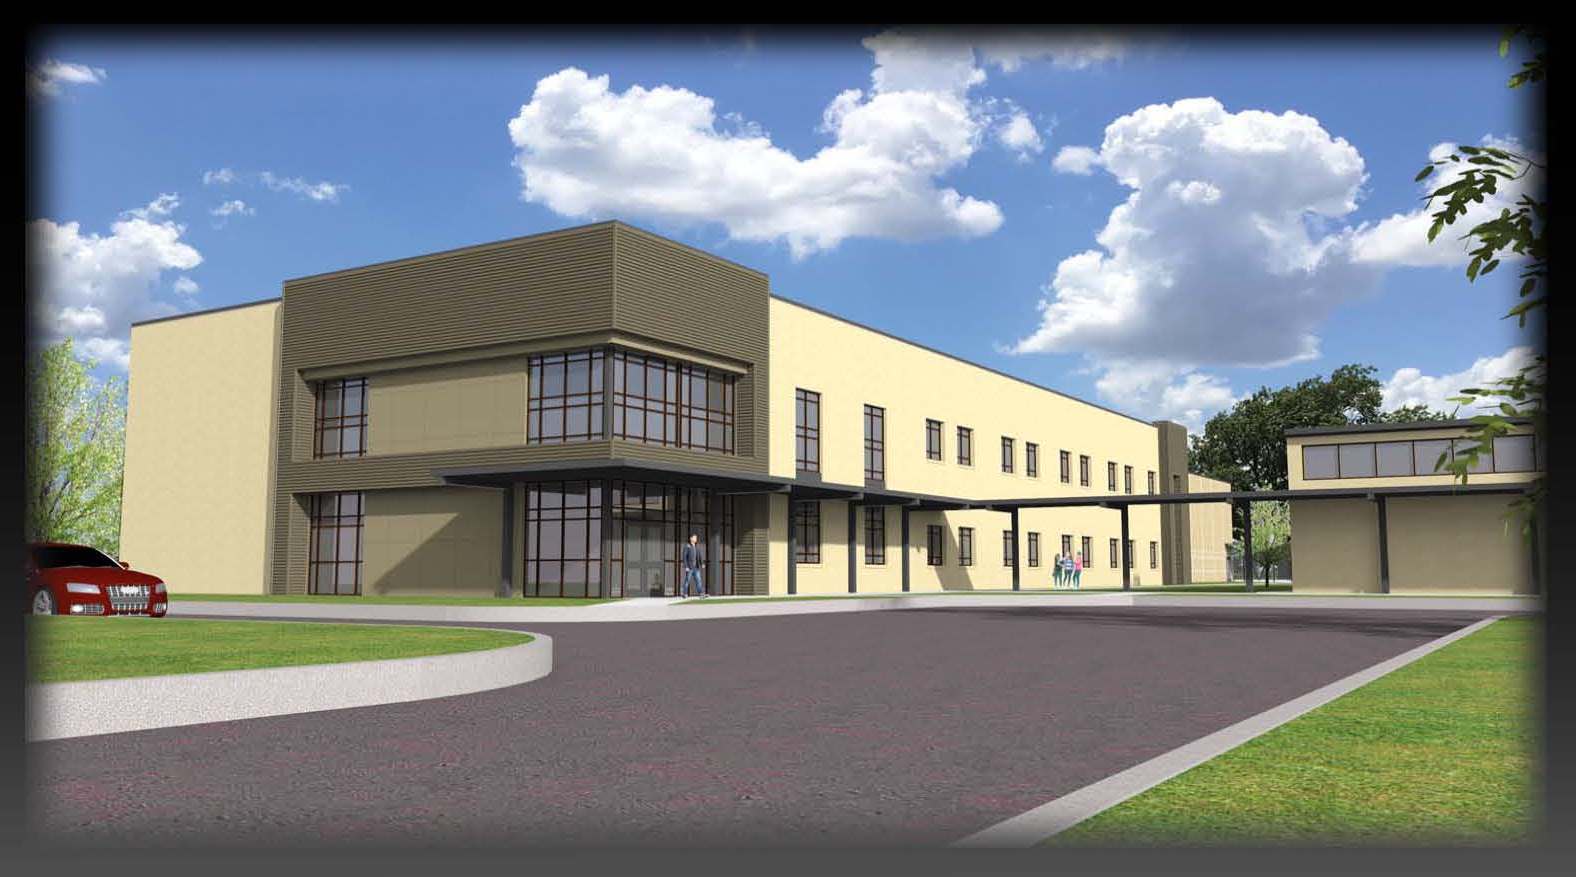 A renderized version of the school building